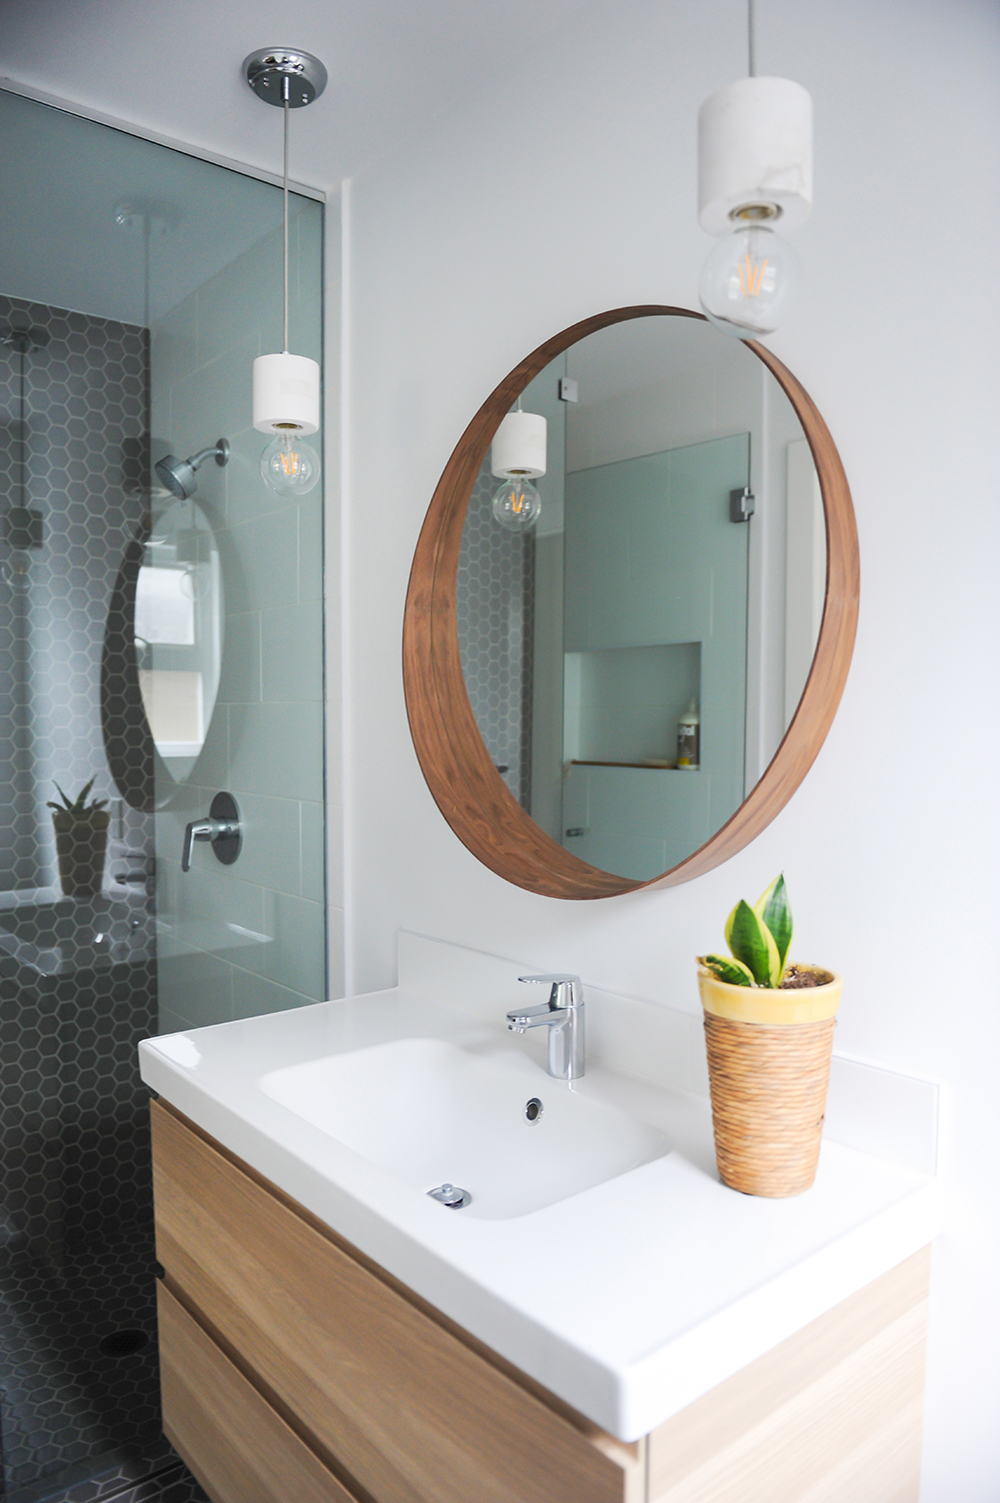 Stylish ensuite with budget-friendly elements.